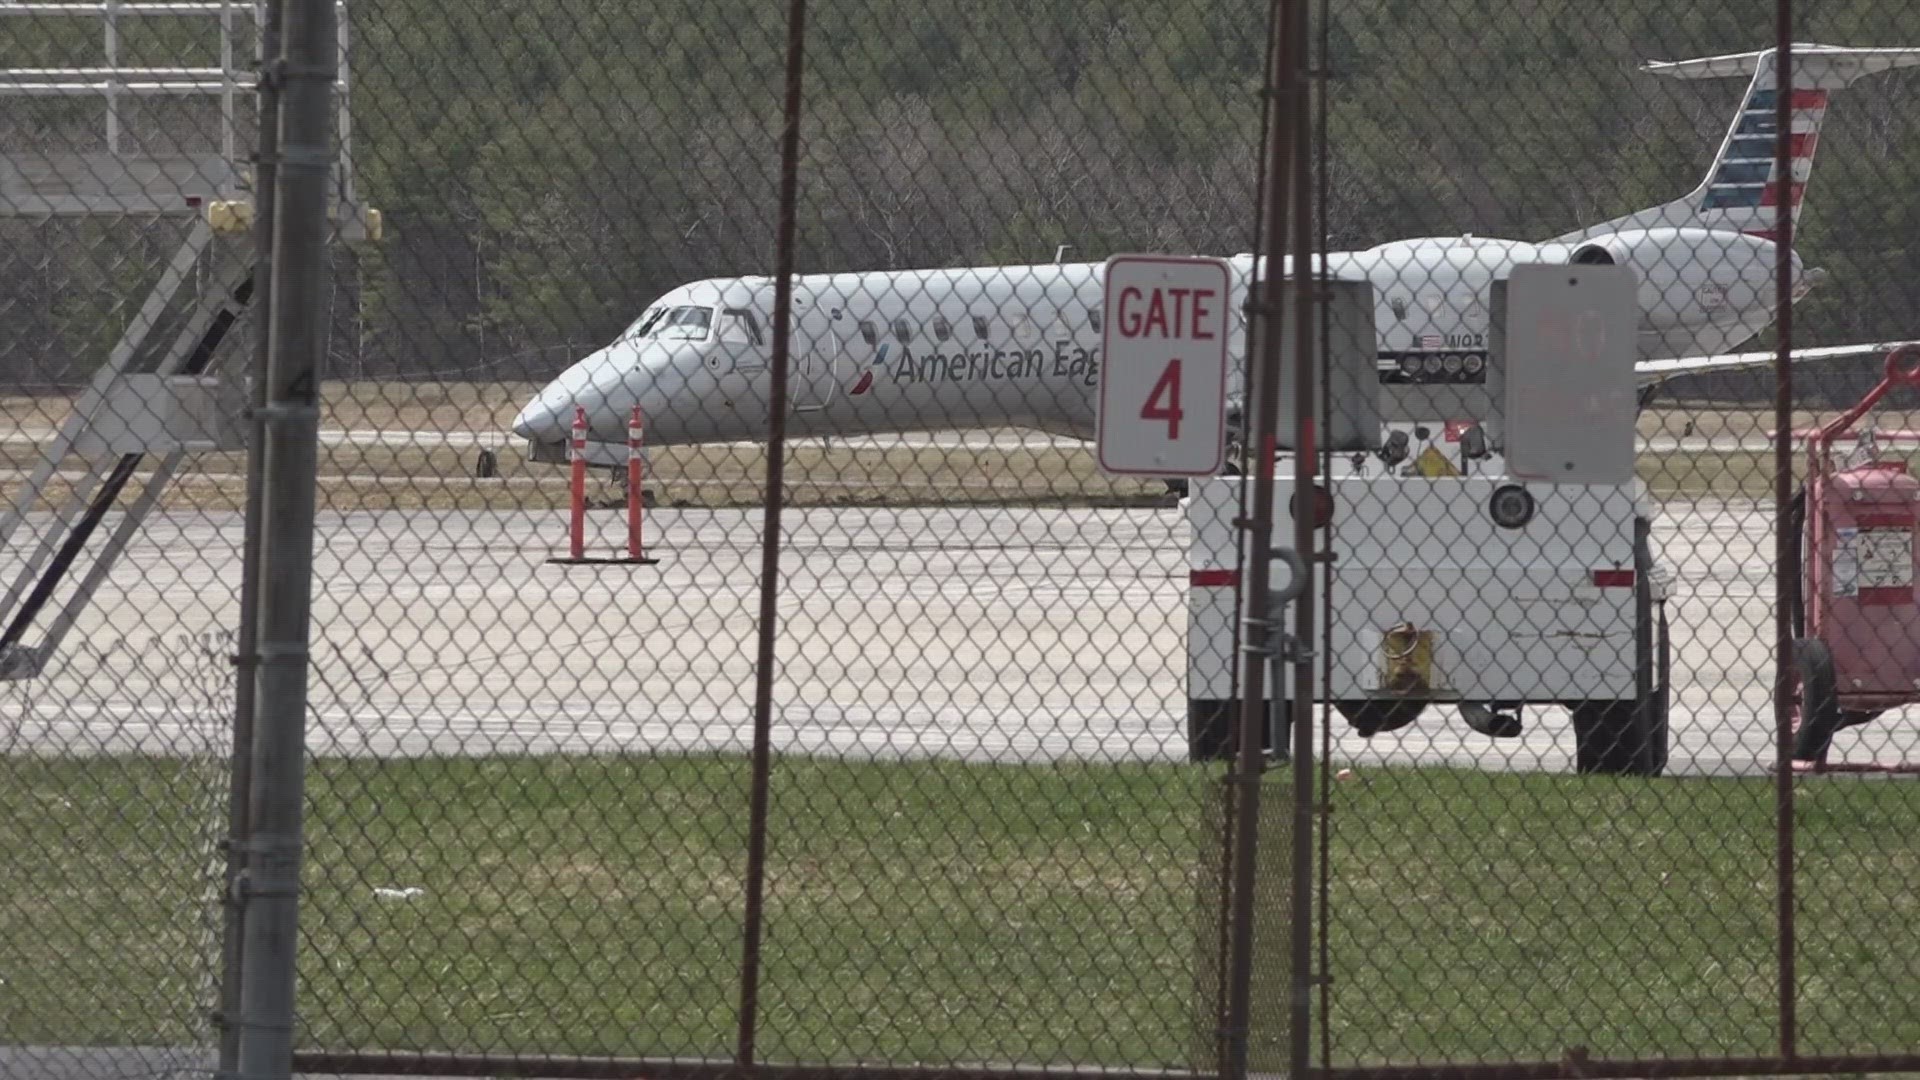 Crews expected it to take longer to free the plane that "stuck" the landing before getting stuck in mud Saturday night, but they were able to get it out by Monday.